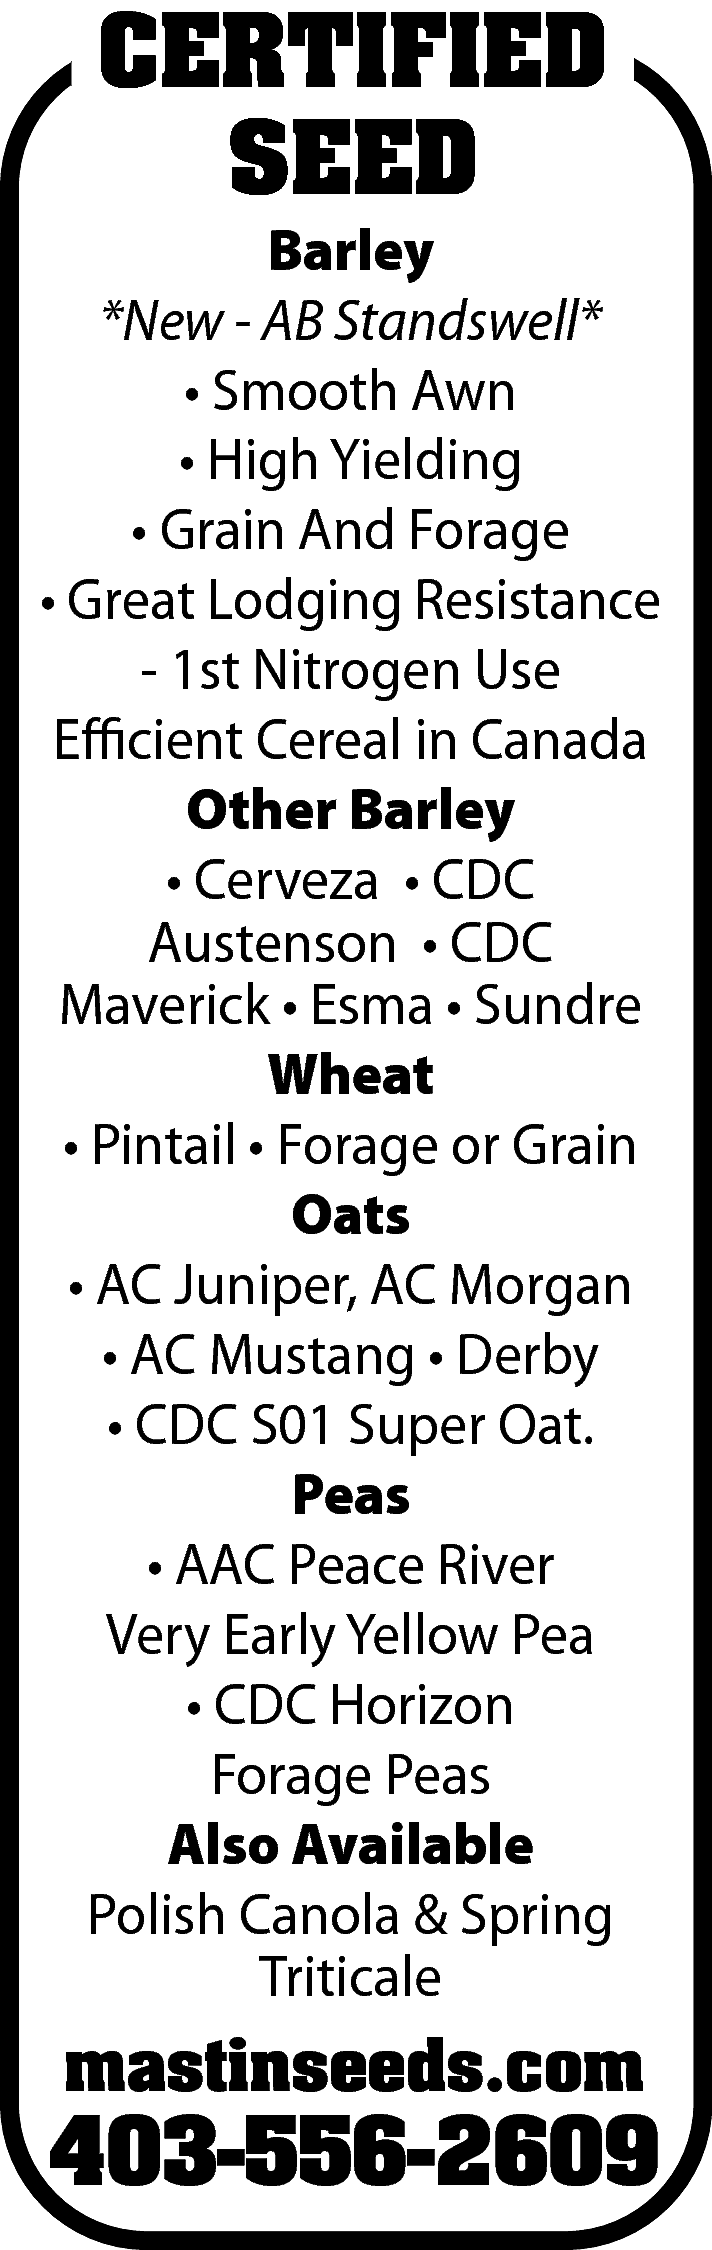 CERTIFIED <br>SEED <br> <br>Barley <br>*New  CERTIFIED  SEED    Barley  *New - AB Standswell*  • Smooth Awn  • High Yielding  • Grain And Forage  • Great Lodging Resistance  - 1st Nitrogen Use  Efficient Cereal in Canada  Other Barley  • Cerveza • CDC  Austenson • CDC  Maverick • Esma • Sundre  Wheat  • Pintail • Forage or Grain  Oats  • AC Juniper, AC Morgan  • AC Mustang • Derby  • CDC S01 Super Oat.  Peas  • AAC Peace River  Very Early Yellow Pea  • CDC Horizon  Forage Peas  Also Available  Polish Canola & Spring  Triticale    mastinseeds.com    403-556-2609    